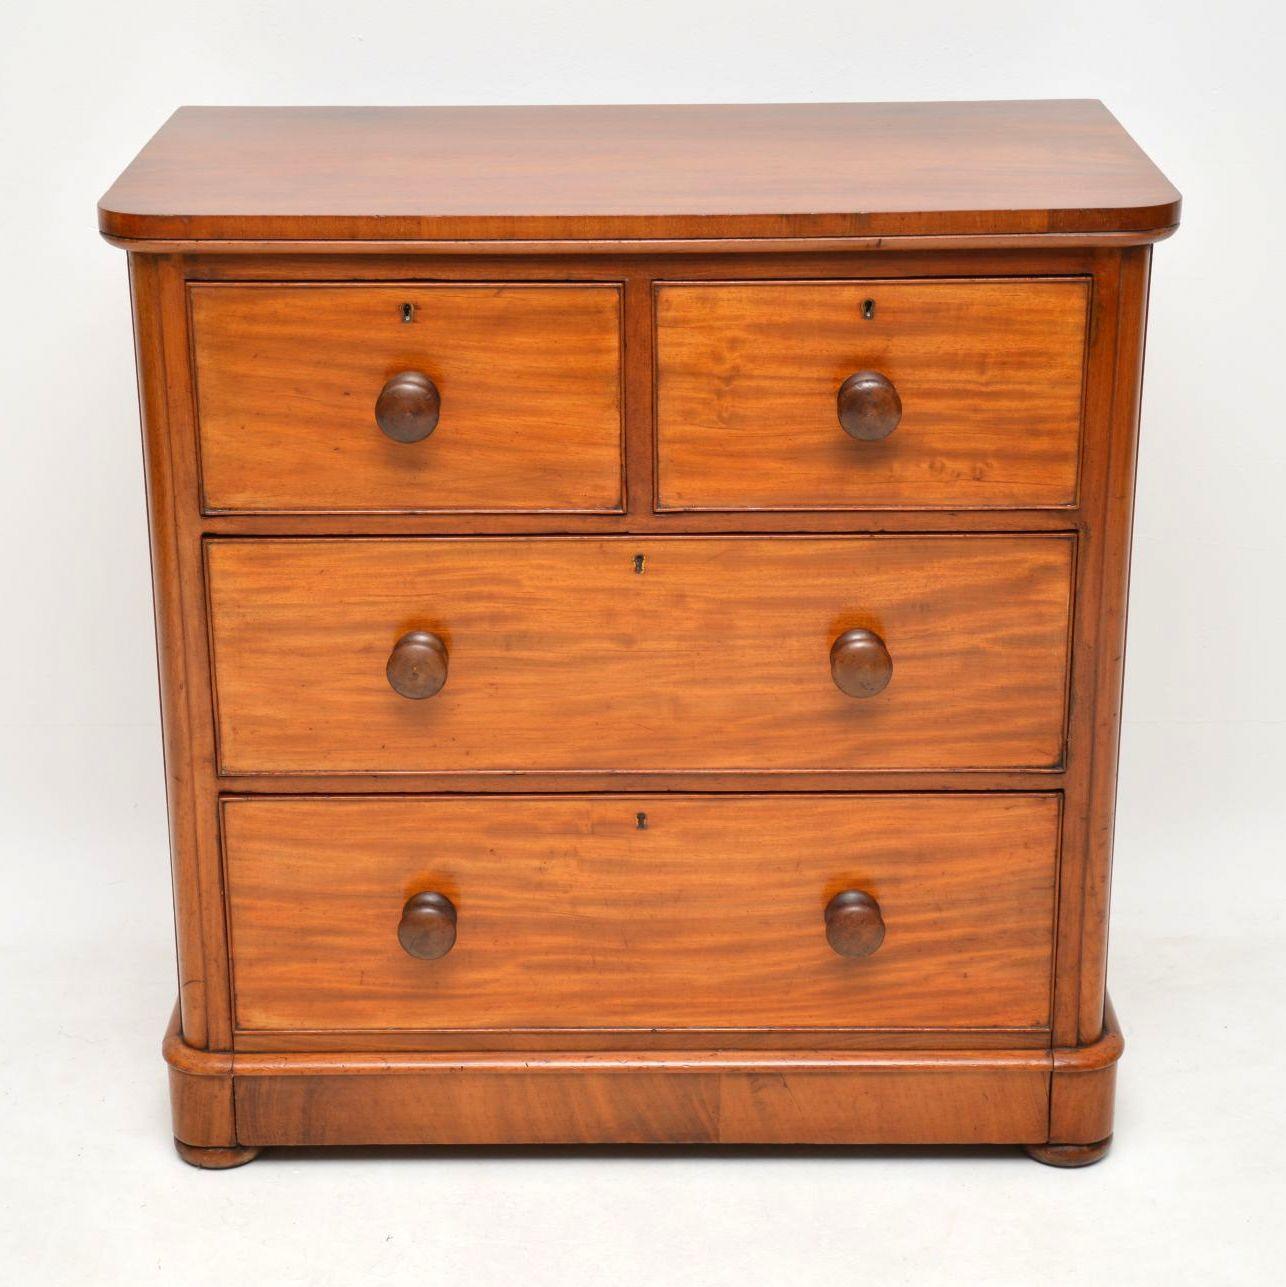 This antique Victorian mahogany chest of drawers dating to the 1860s-1880s period is of the smaller variety and quite rare to find in this size. It’s in good original condition with all the drawers working well. The drawers have turned bun handles,